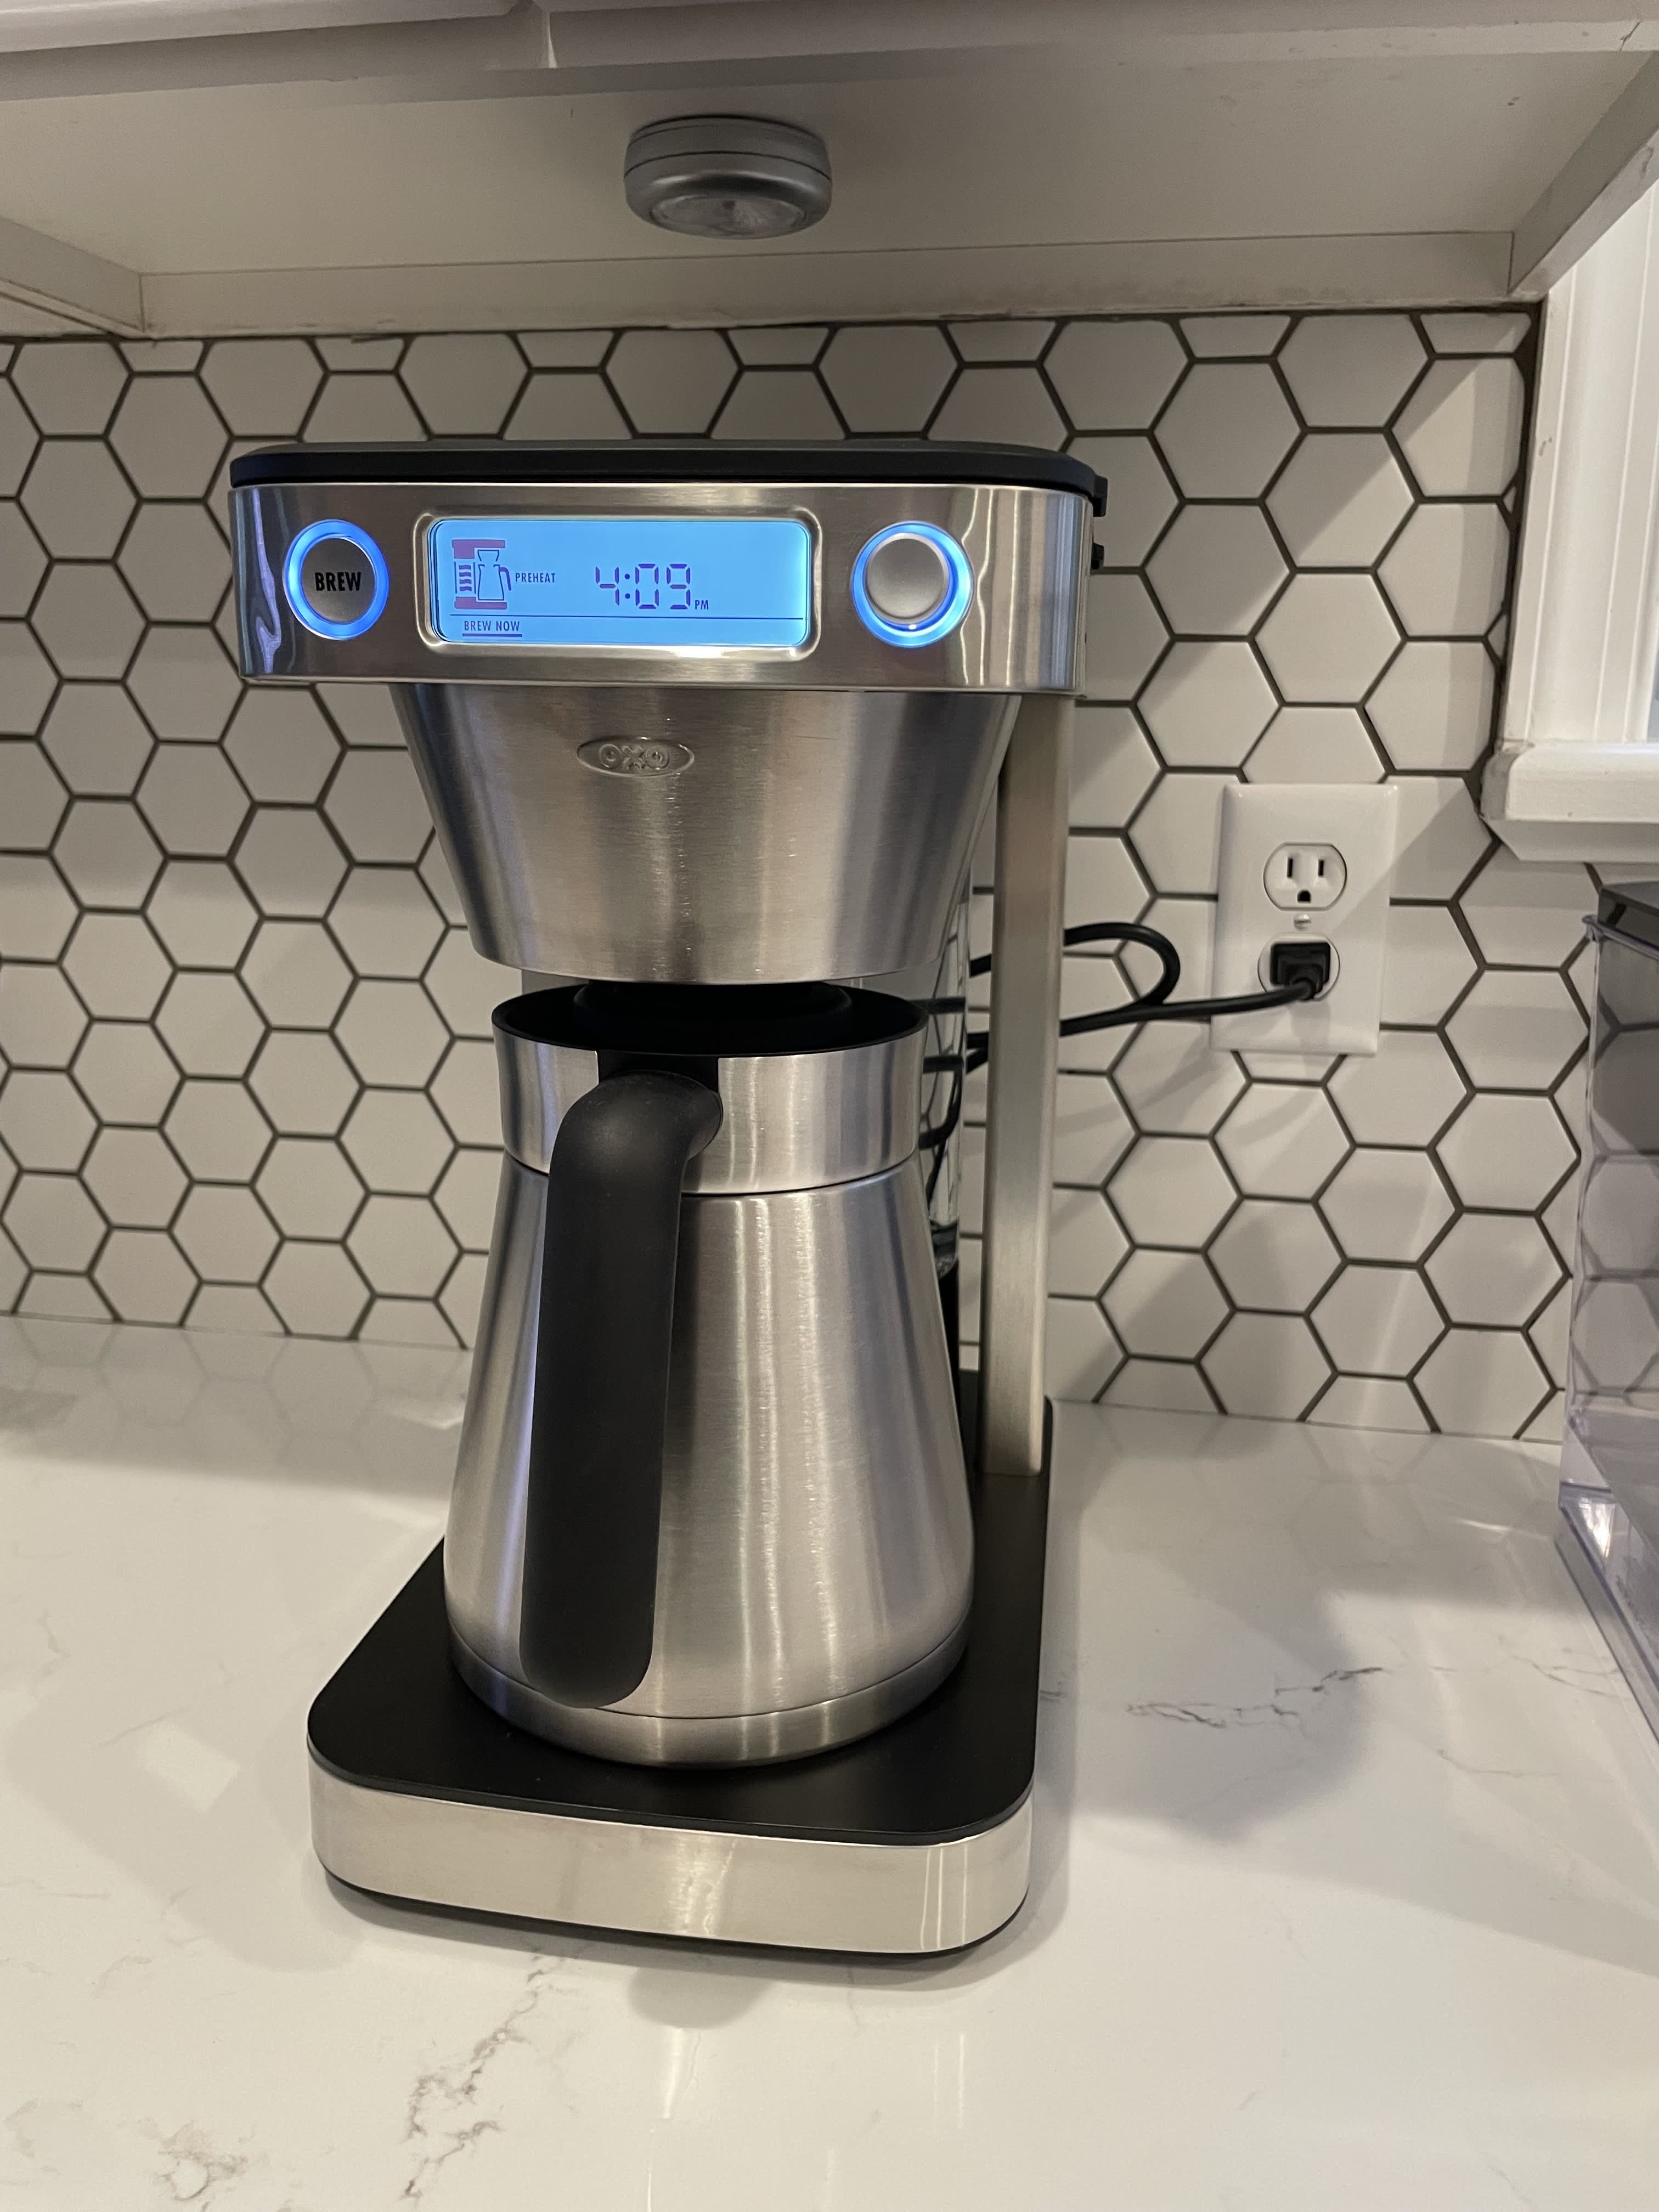 OXO On 12 Cup Coffee Maker & Brewing System Review